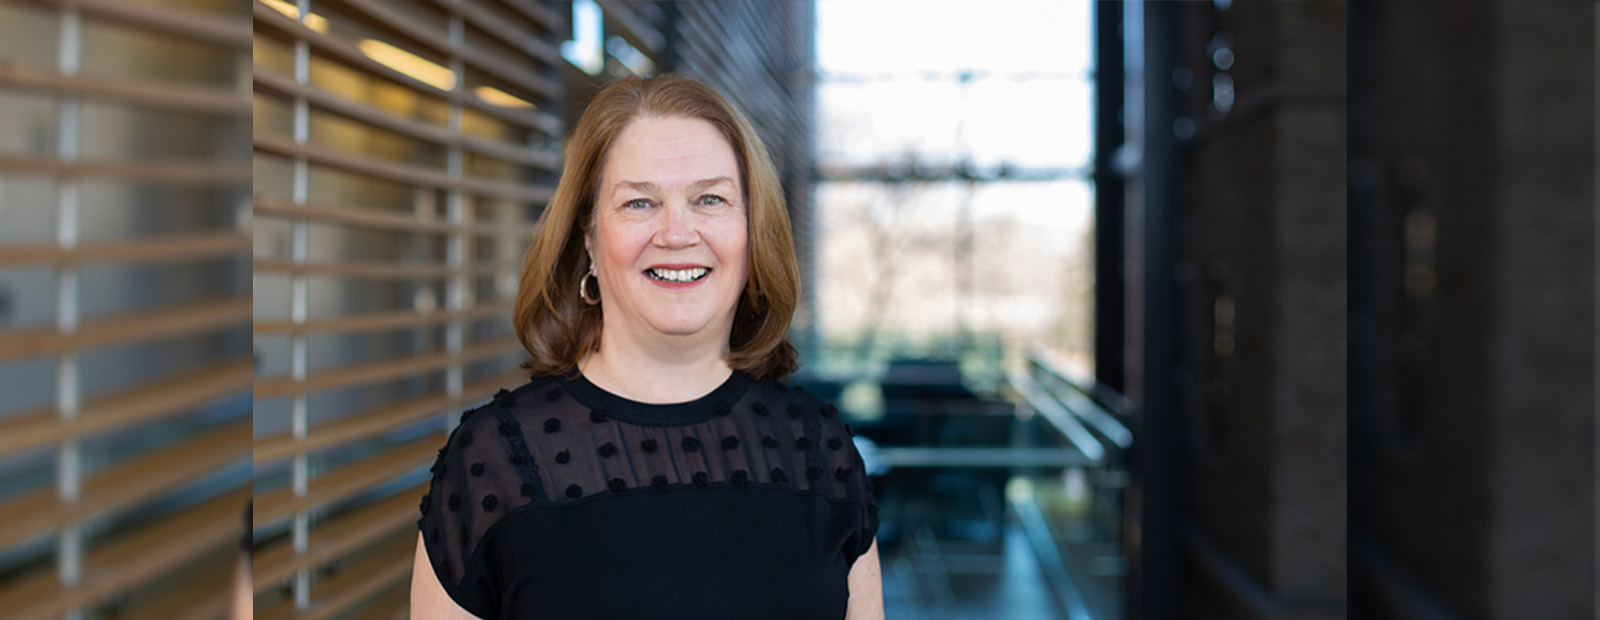 Dr. Jane Philpott wears a black shirt and smiles at the camera